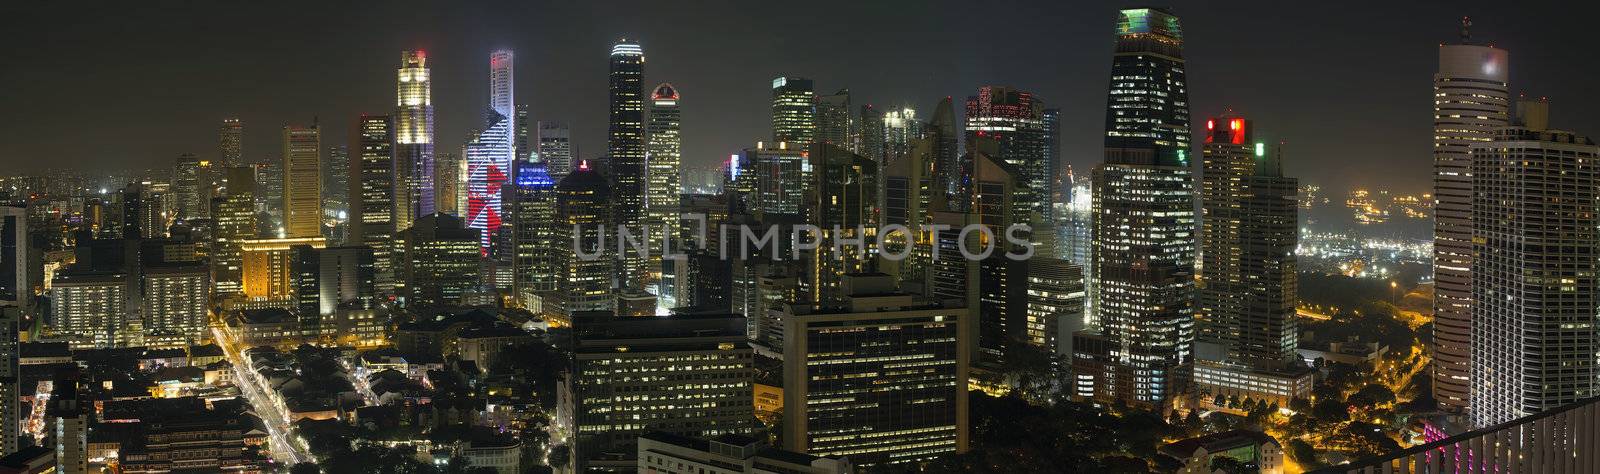 Singapore City Skyline with Central Financial District and Chinatown at Night Panorama